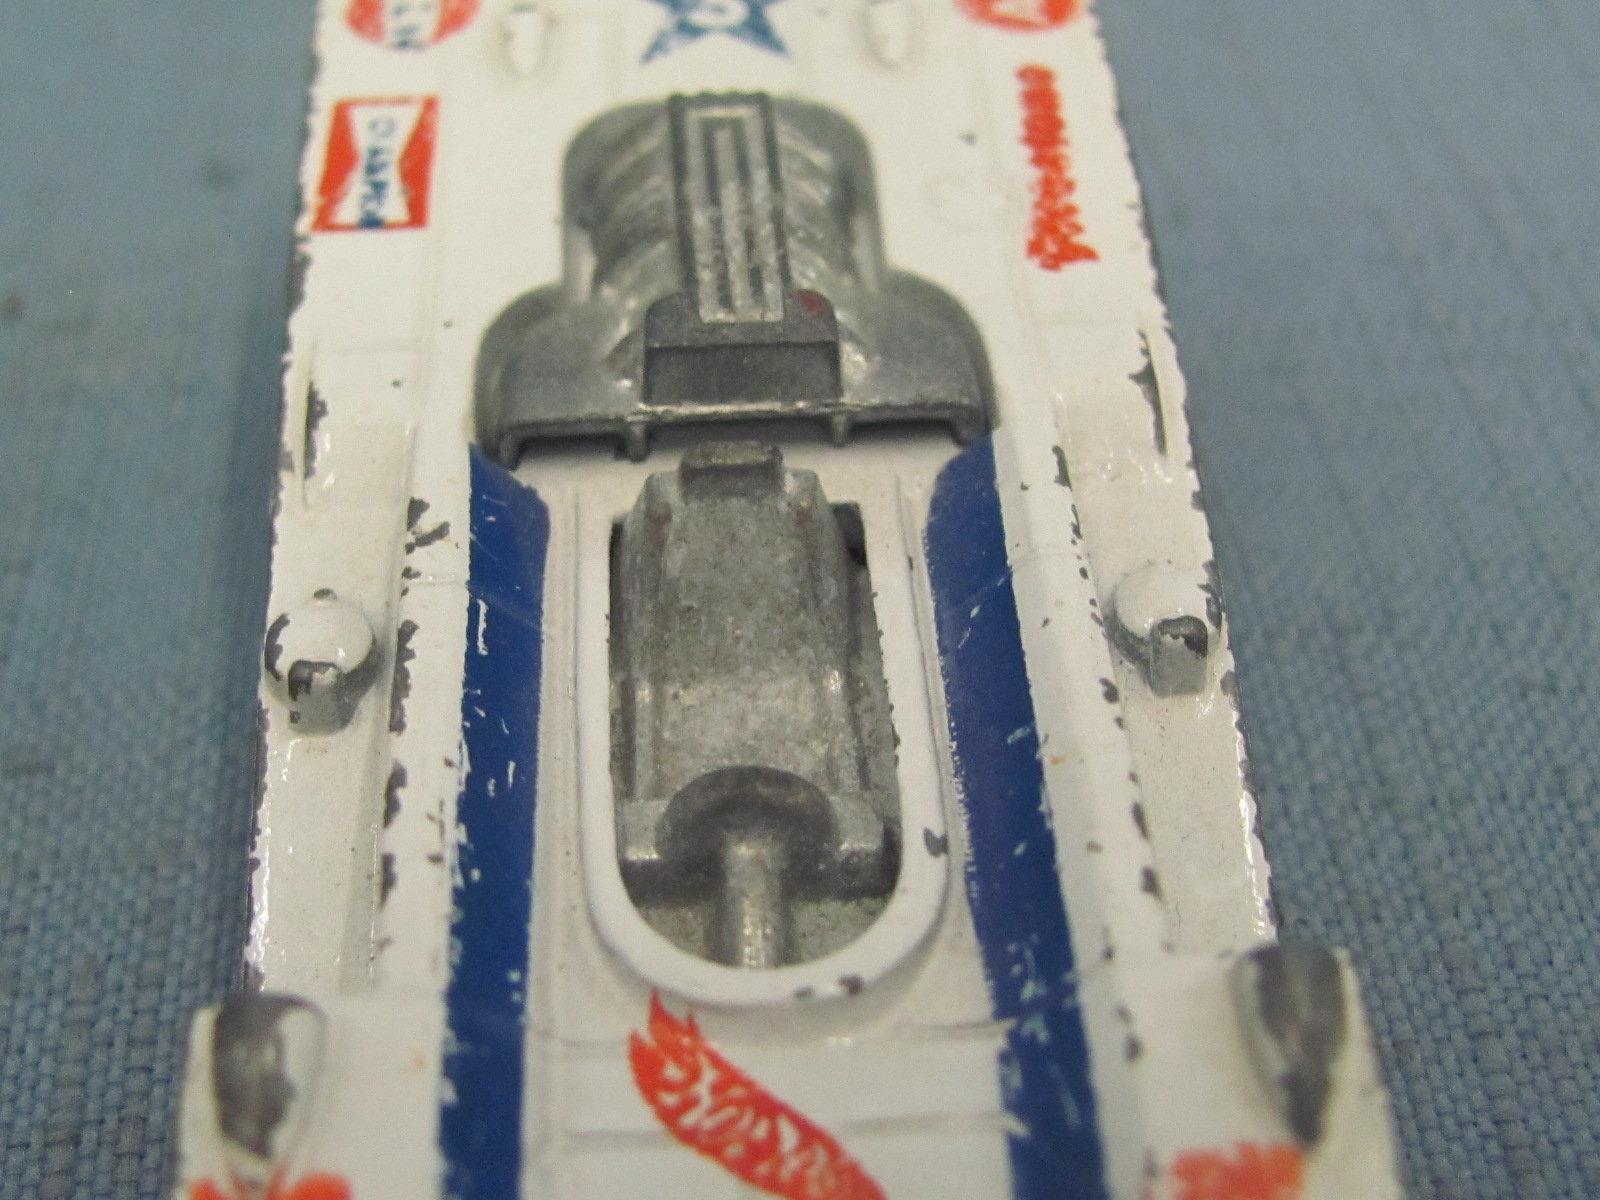 Matchbox & Hot Wheels (Red Line) & Misc. Toy Vehicles – Shortest is 2 7/8” - Longest is 5”